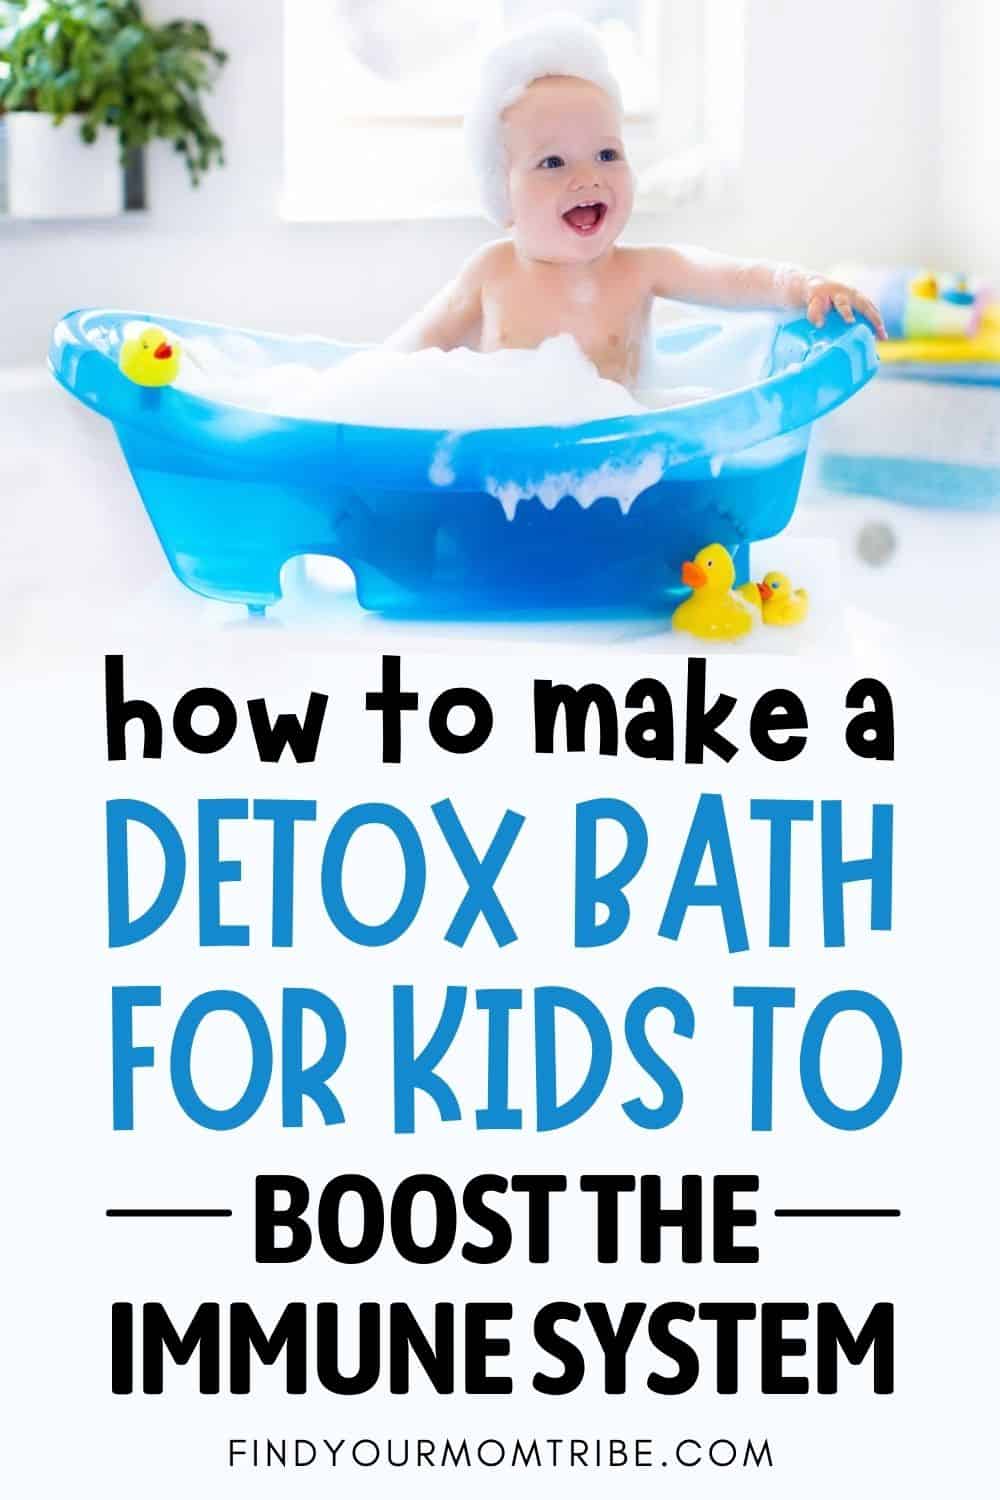 How To Make A Detox Bath For Kids To Boost The Immune System Pinterest